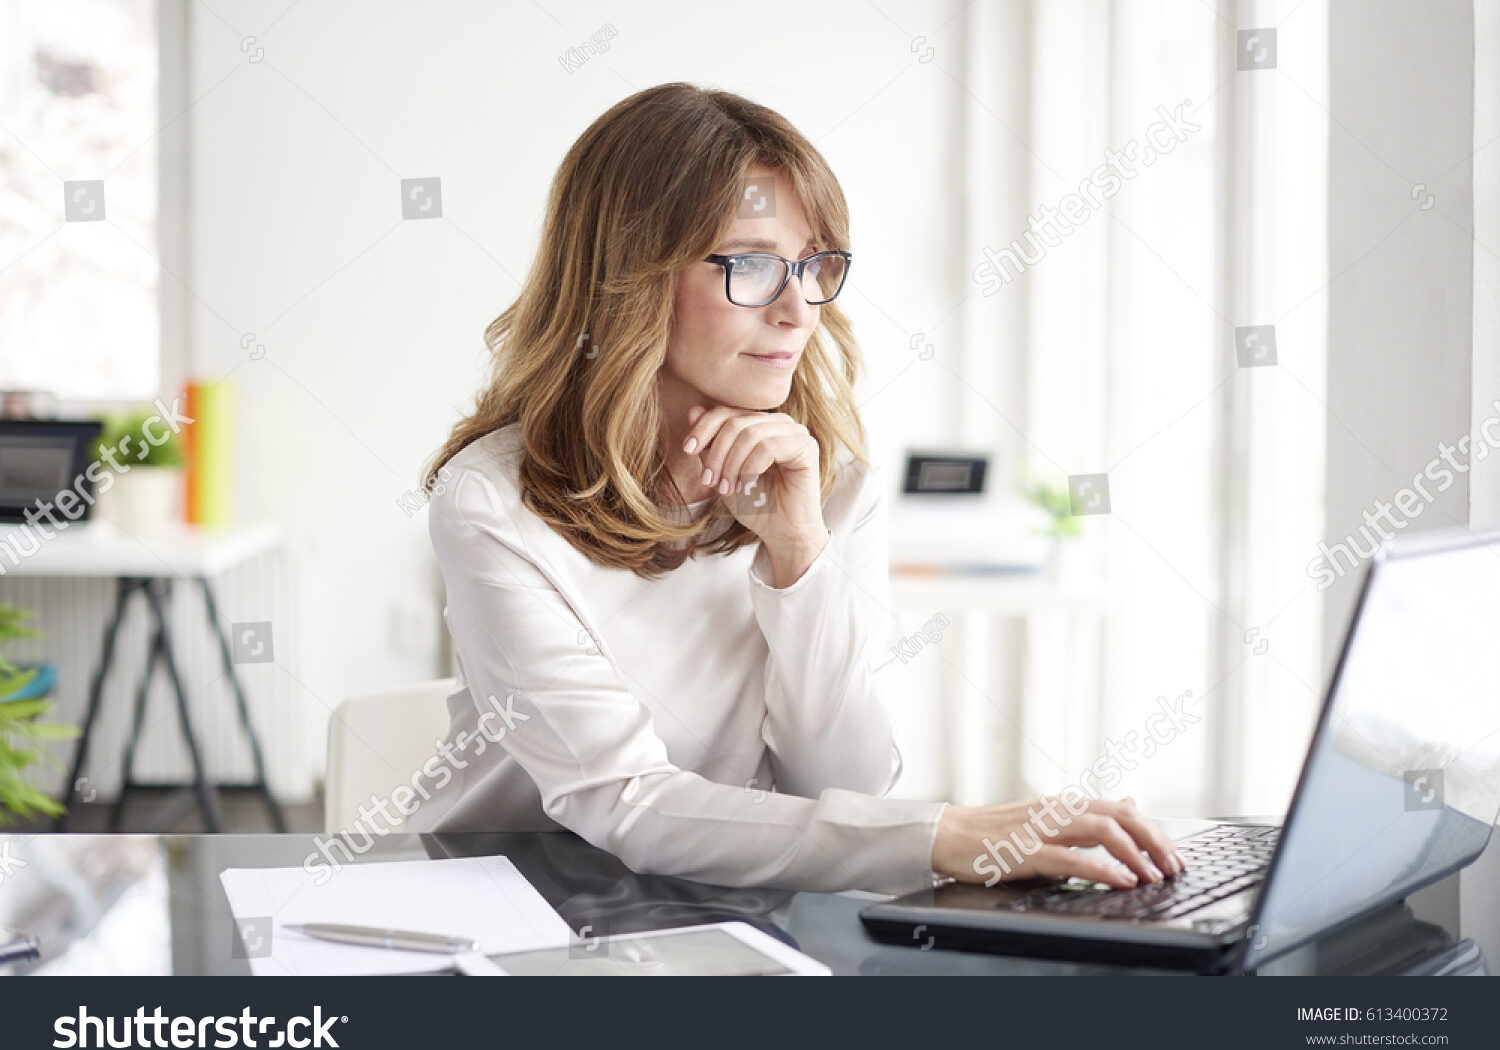 stock-photo-shot-of-an-attractive-mature-businesswoman-working-on-laptop-in-her-workstation-613400372